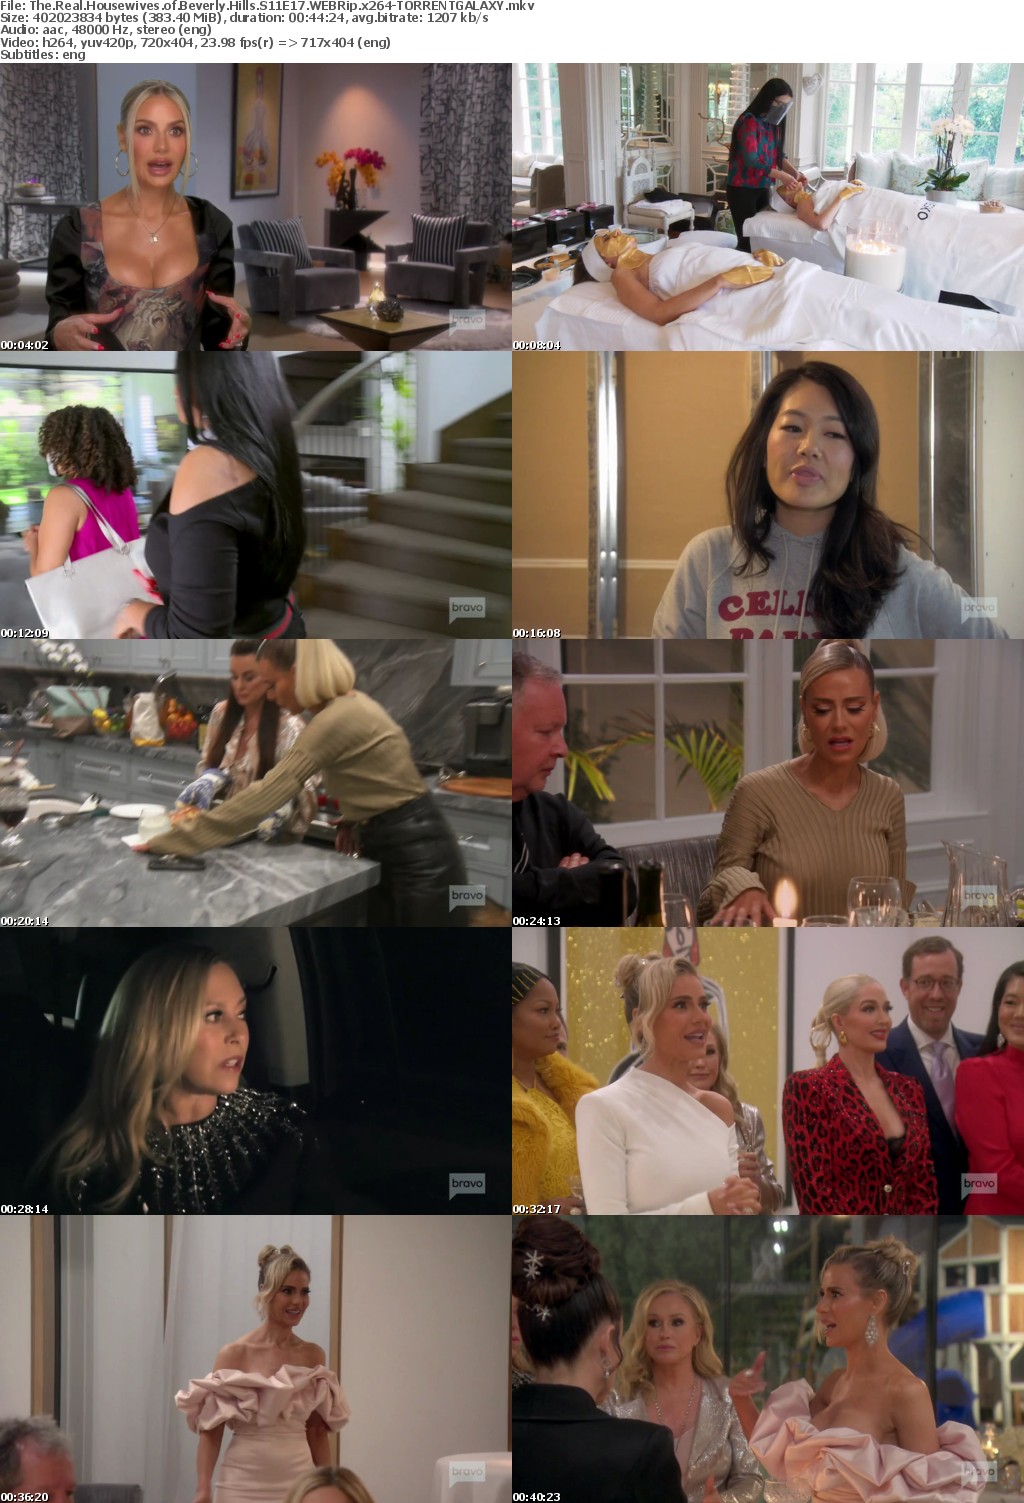 The Real Housewives of Beverly Hills S11E17 WEBRip x264-GALAXY